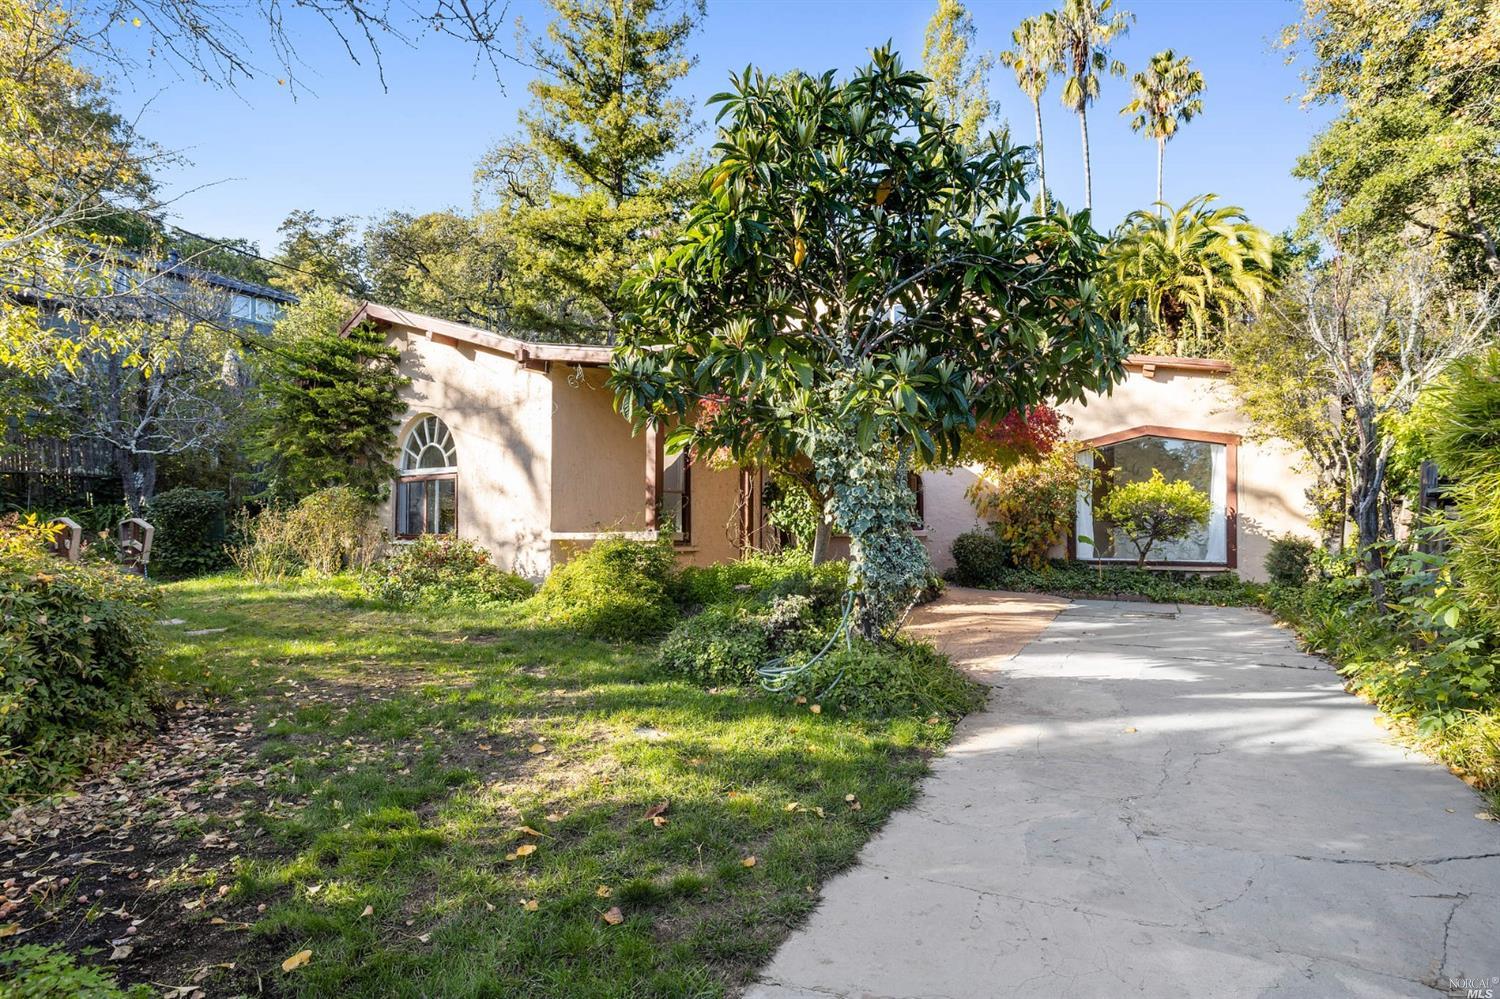 Sunny location with good privacy in prime Kentfield spot